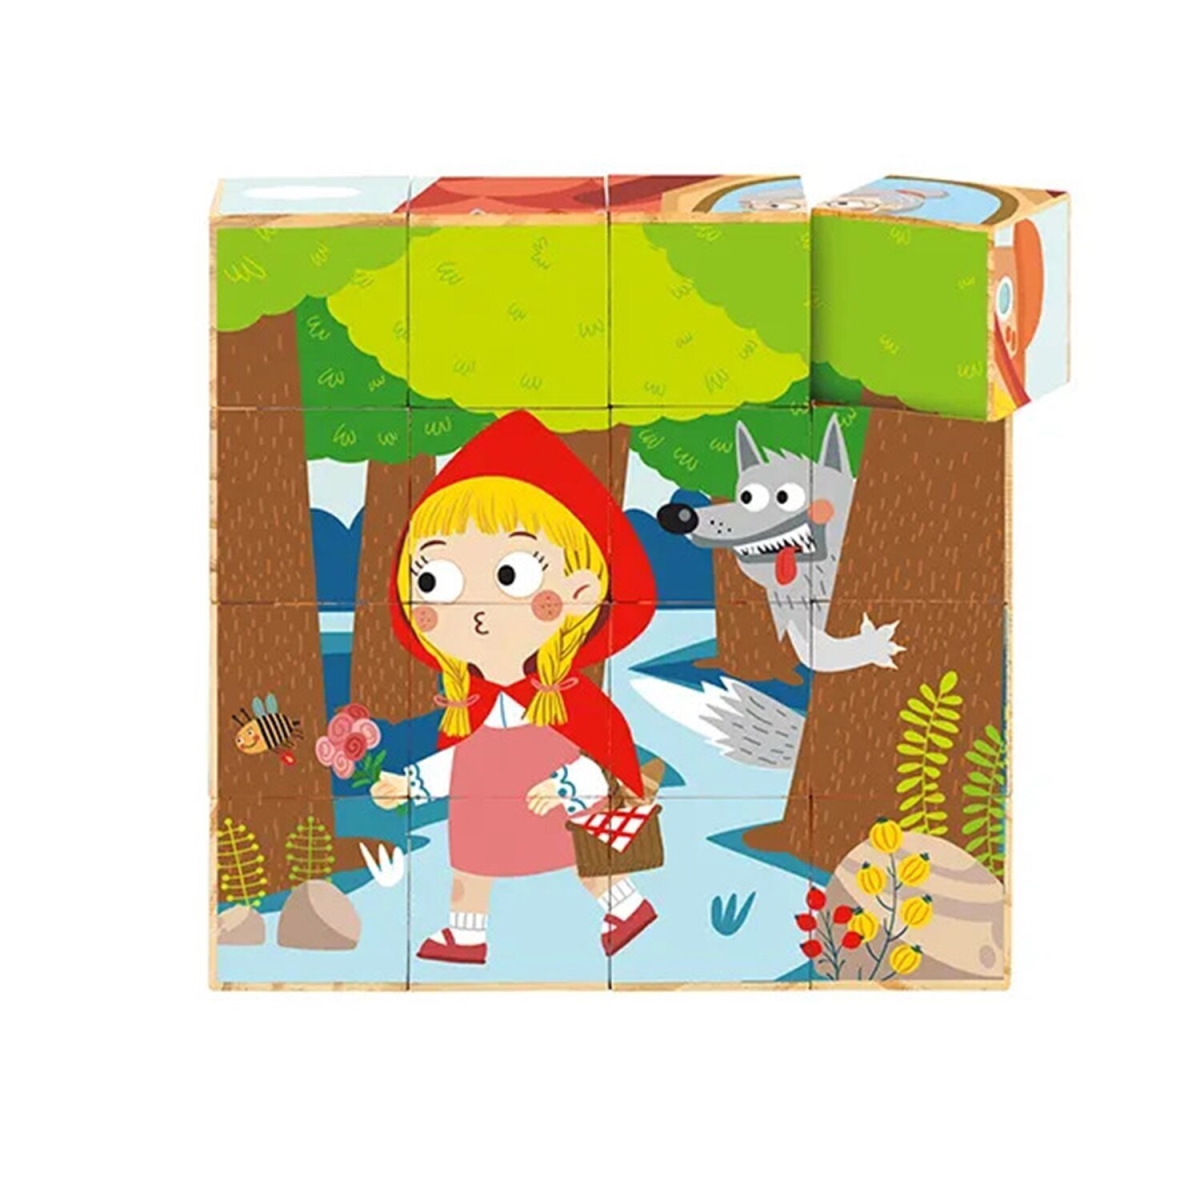 Picture of Tooky Toy 300366 14 x 14 x 4 cm Little Red Riding Hood Block Puzzle